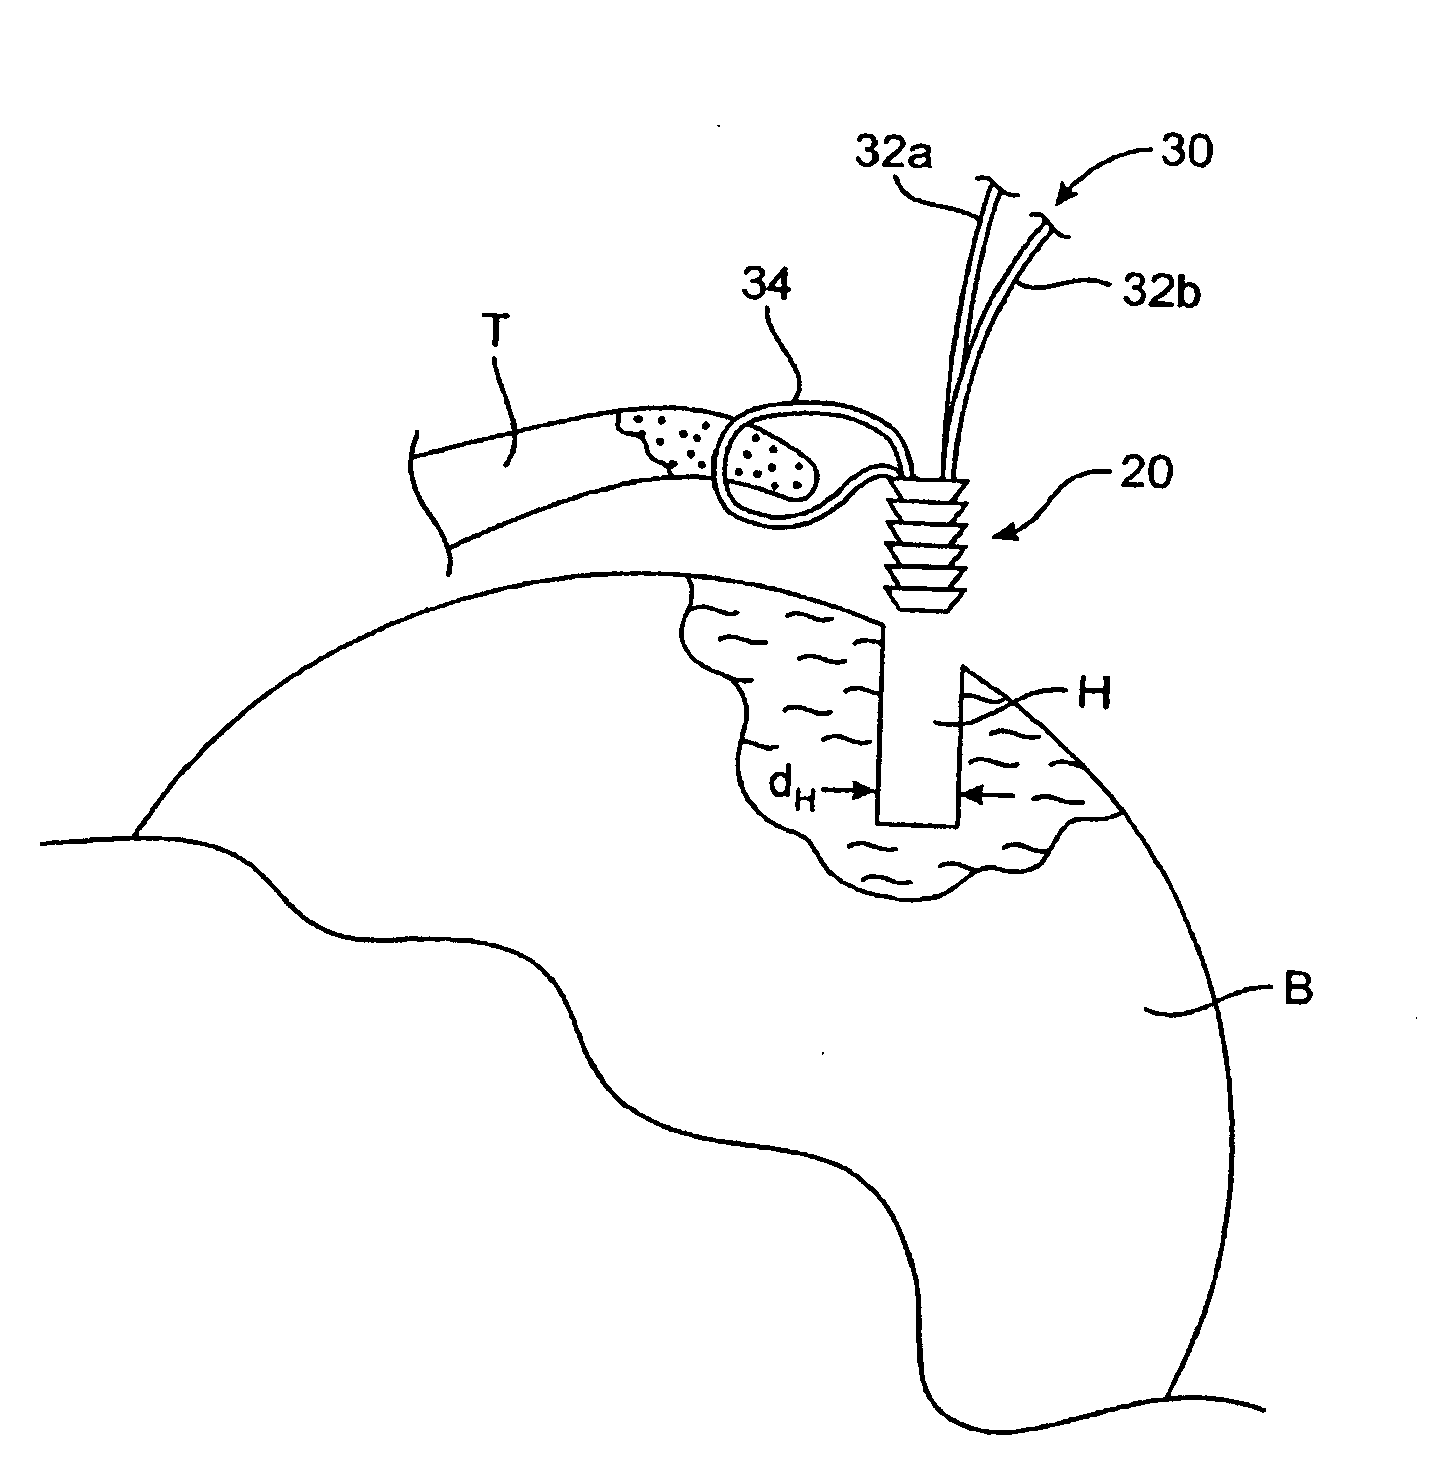 Tack anchor systems, bone anchor systems, and methods of use